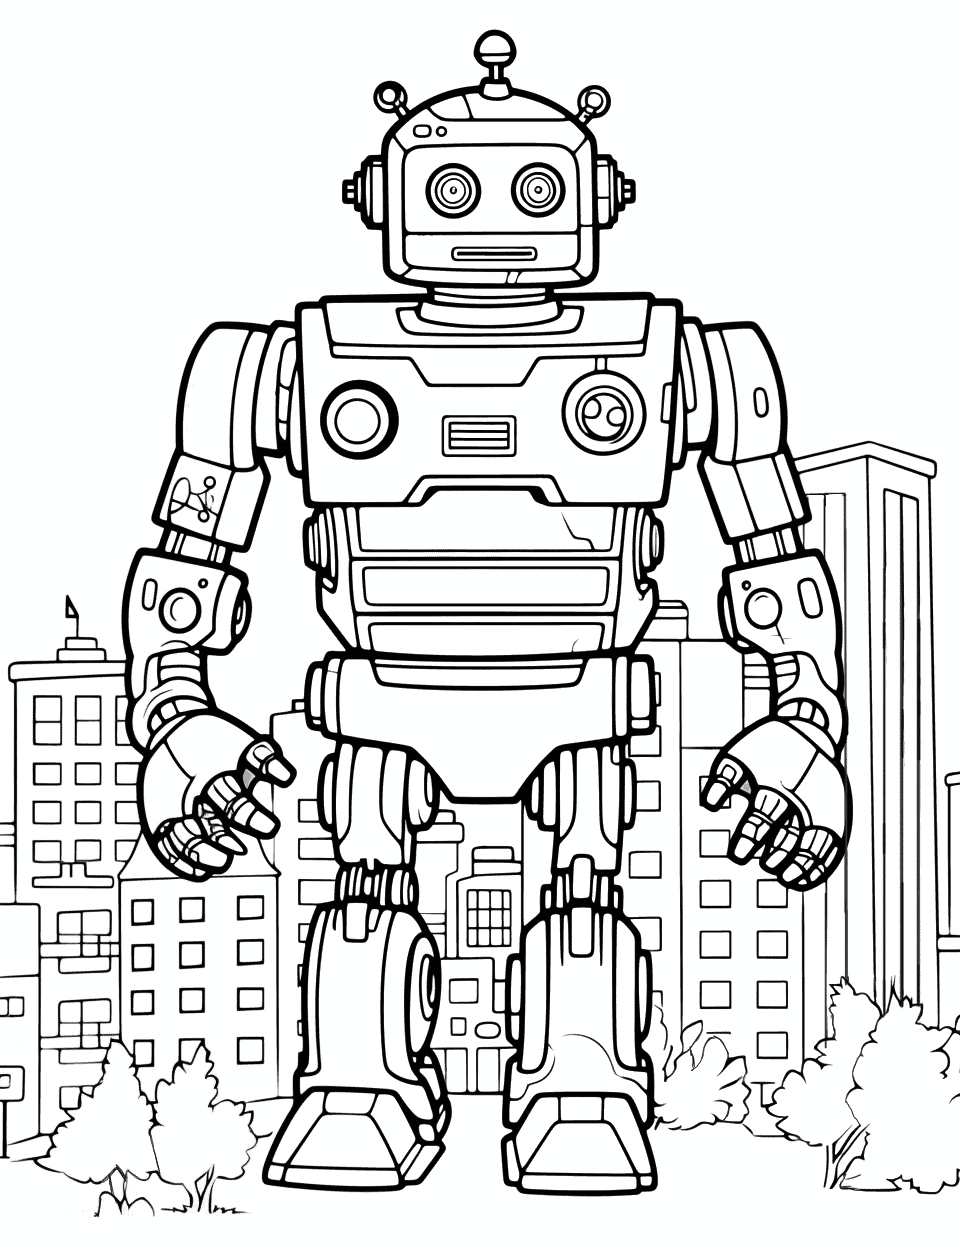 Giant Robot Guarding a City Coloring Page - A massive robot standing protectively in the city.